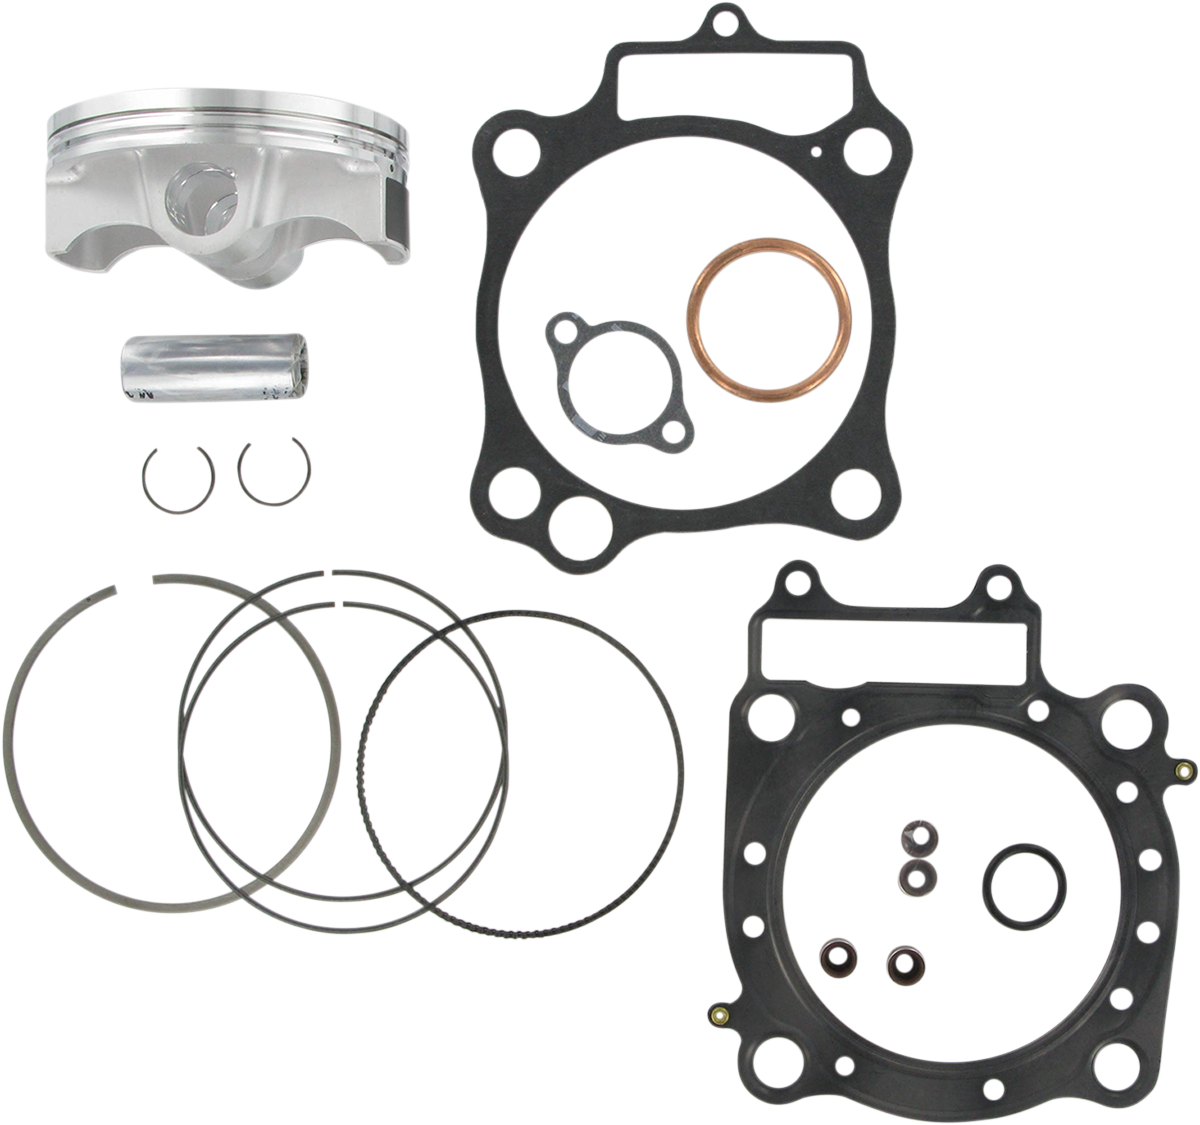 WISECO Piston Kit with Gaskets - Standard High-Performance CRF450R 2002-2008 PK1367